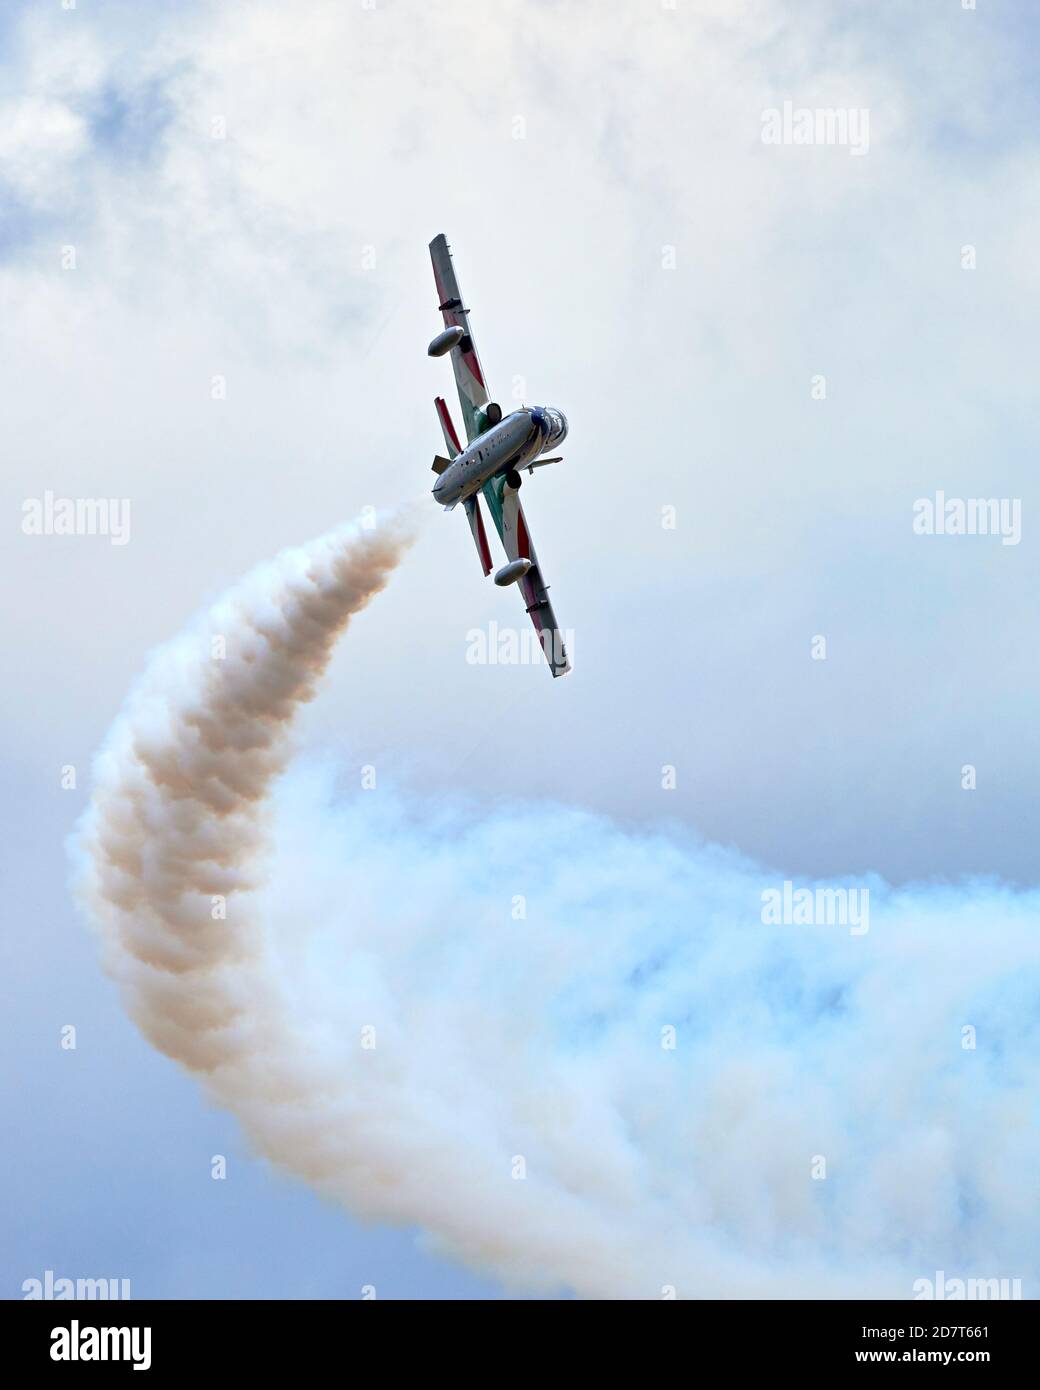 Aermacchi MB-339 of the Frecce Tricolori Italian Air Force aerobatic display team, banking left and trailing white smoke at RIAT 2019 Stock Photo